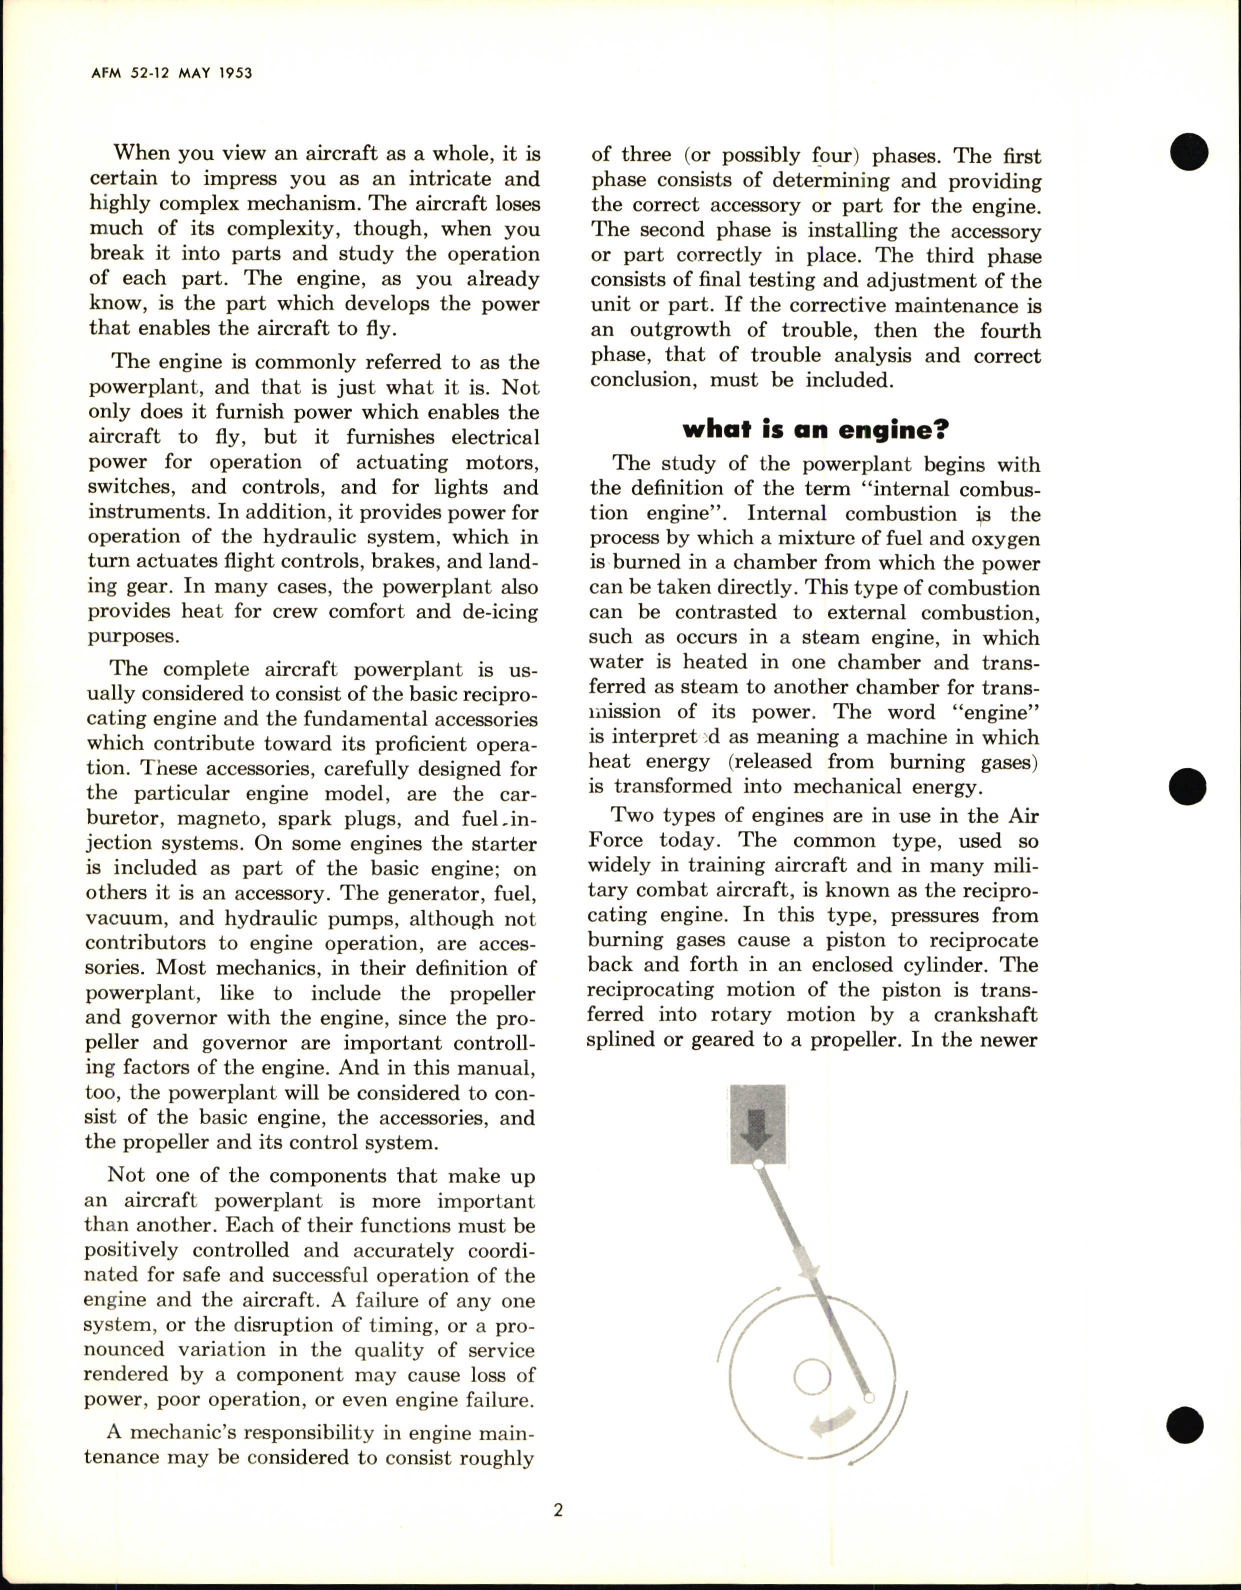 Sample page 6 from AirCorps Library document: Powerplant Maintenance for Reciprocating Engines